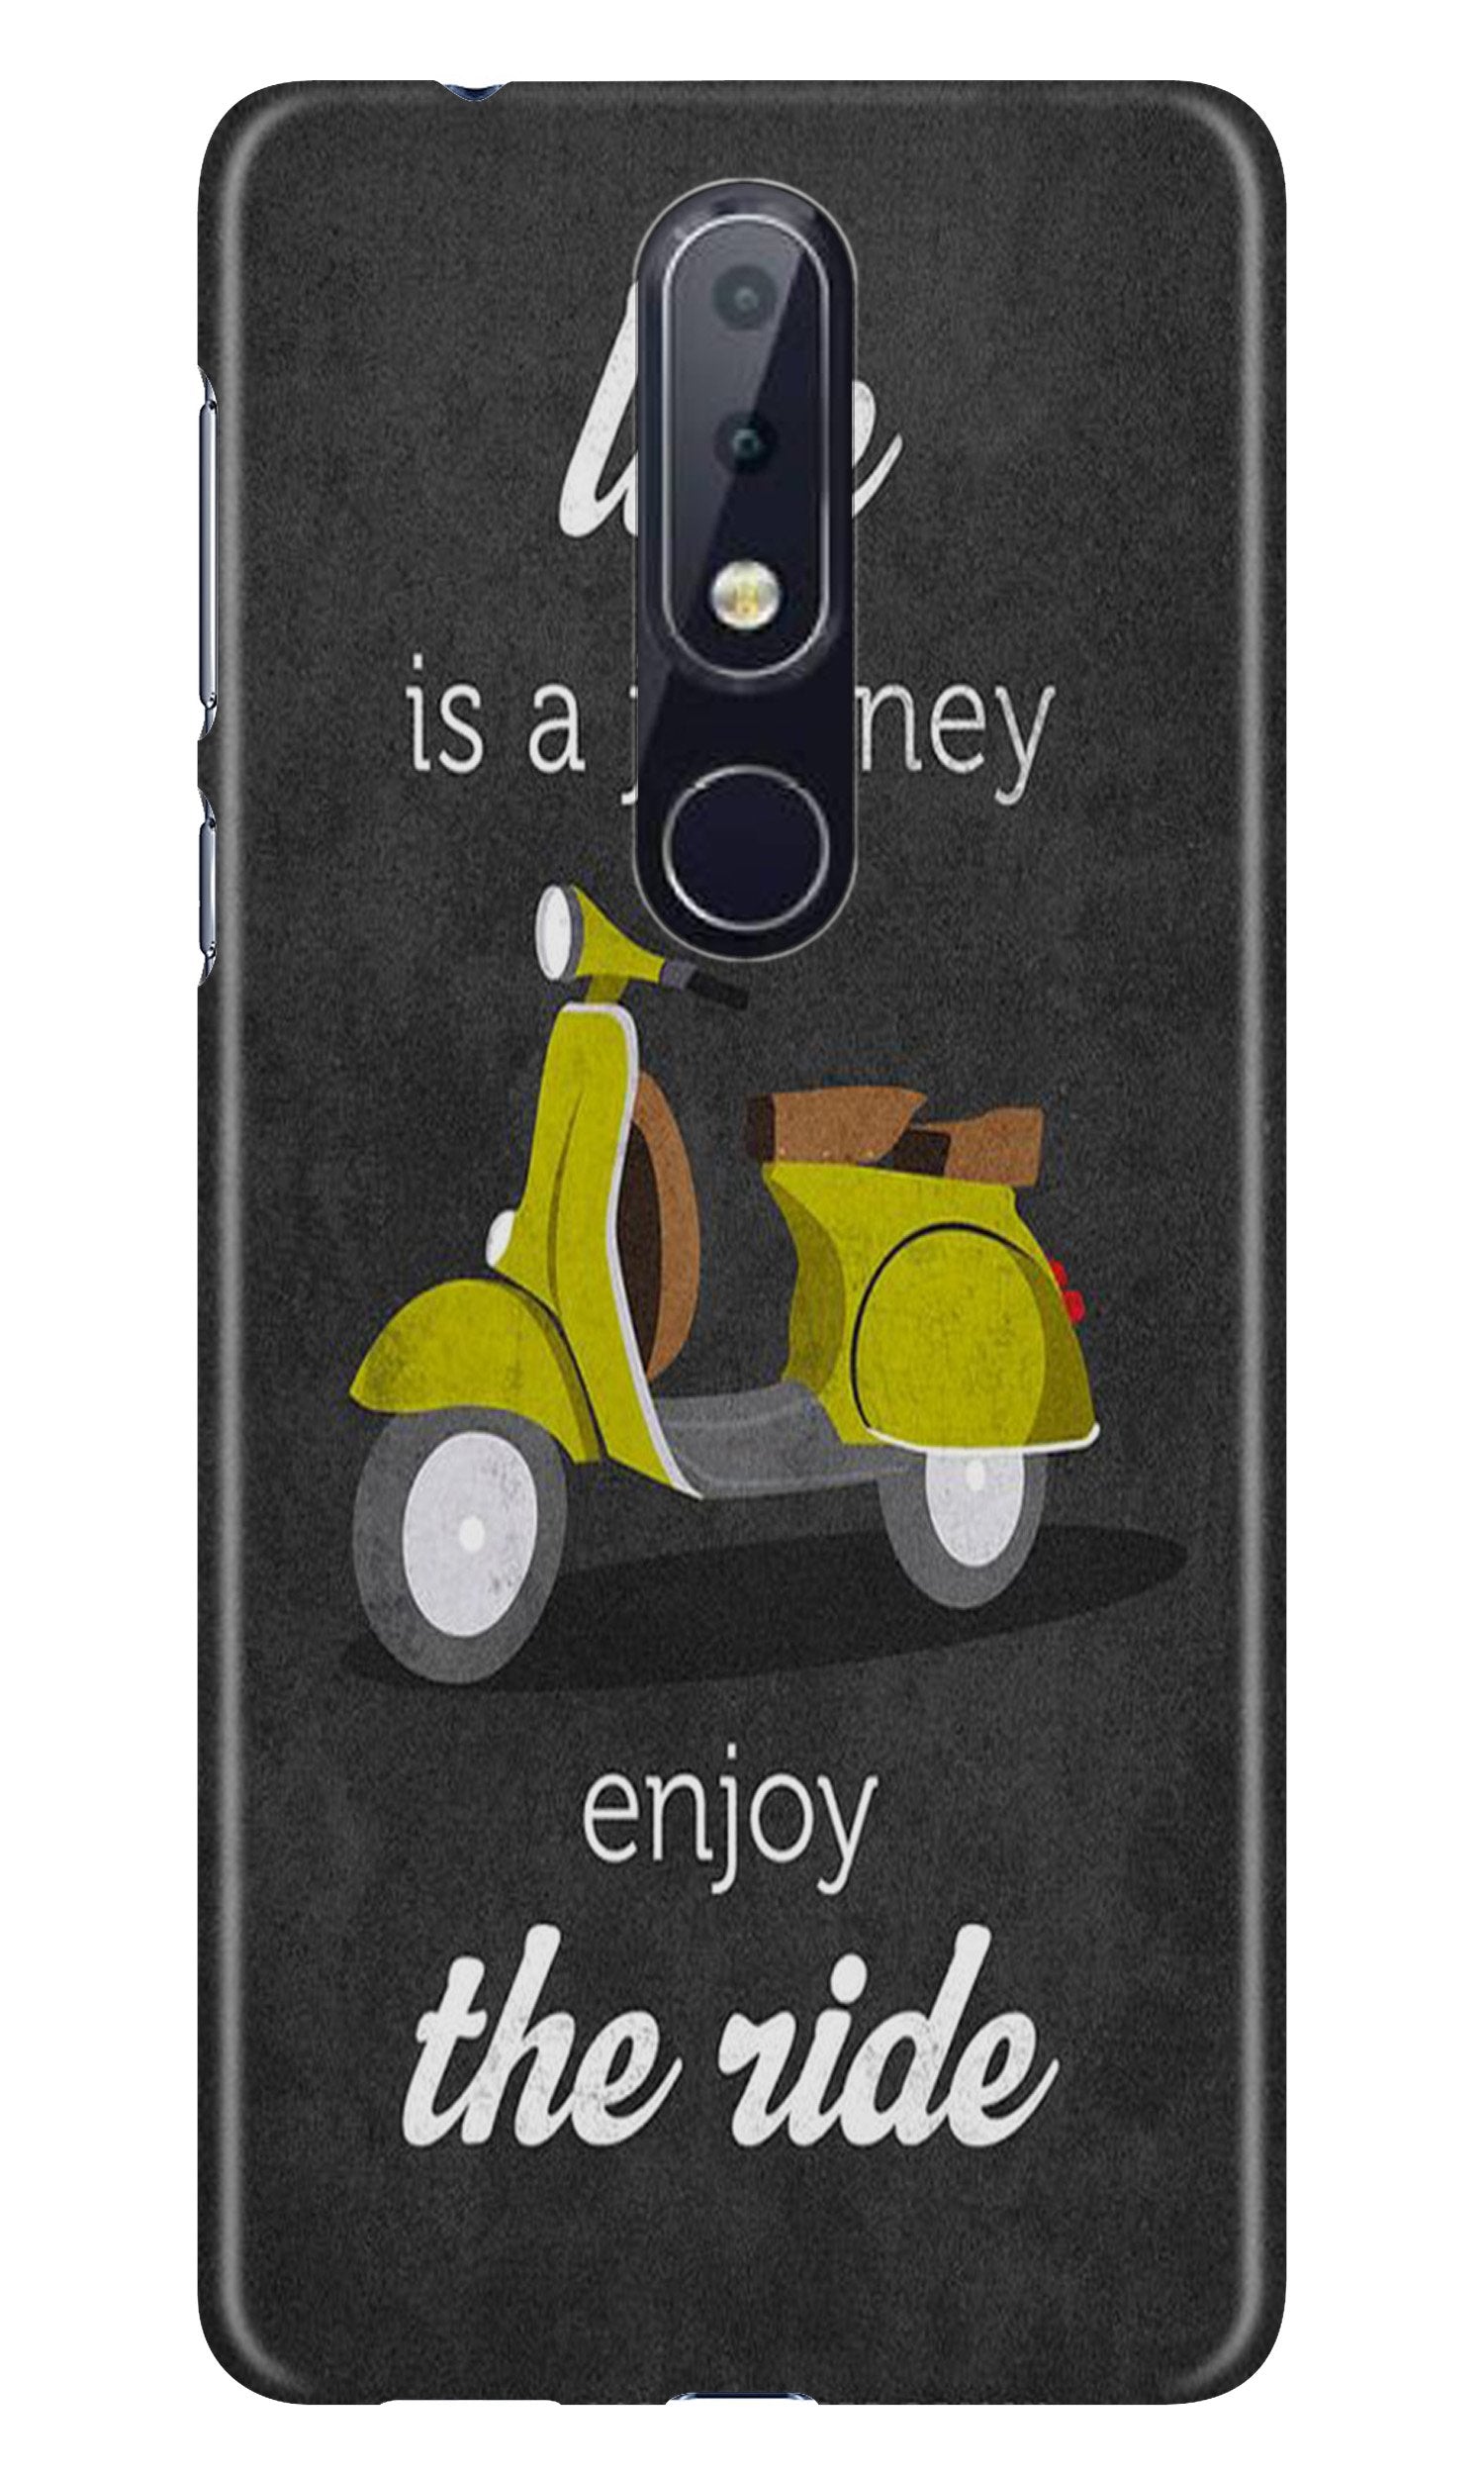 Life is a Journey Case for Nokia 4.2 (Design No. 261)